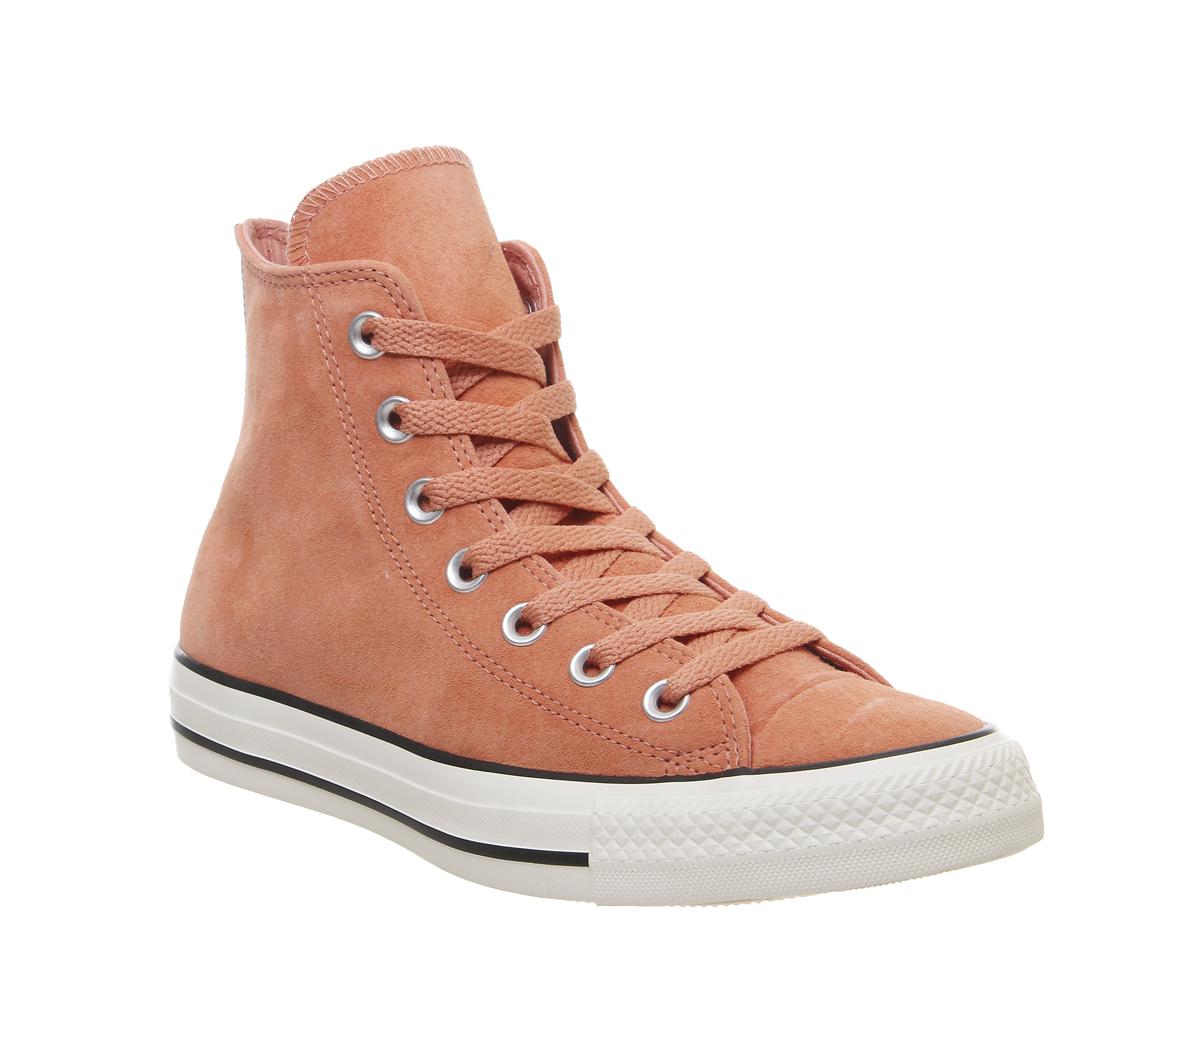 Converse All Star Hi Leather Trainers 